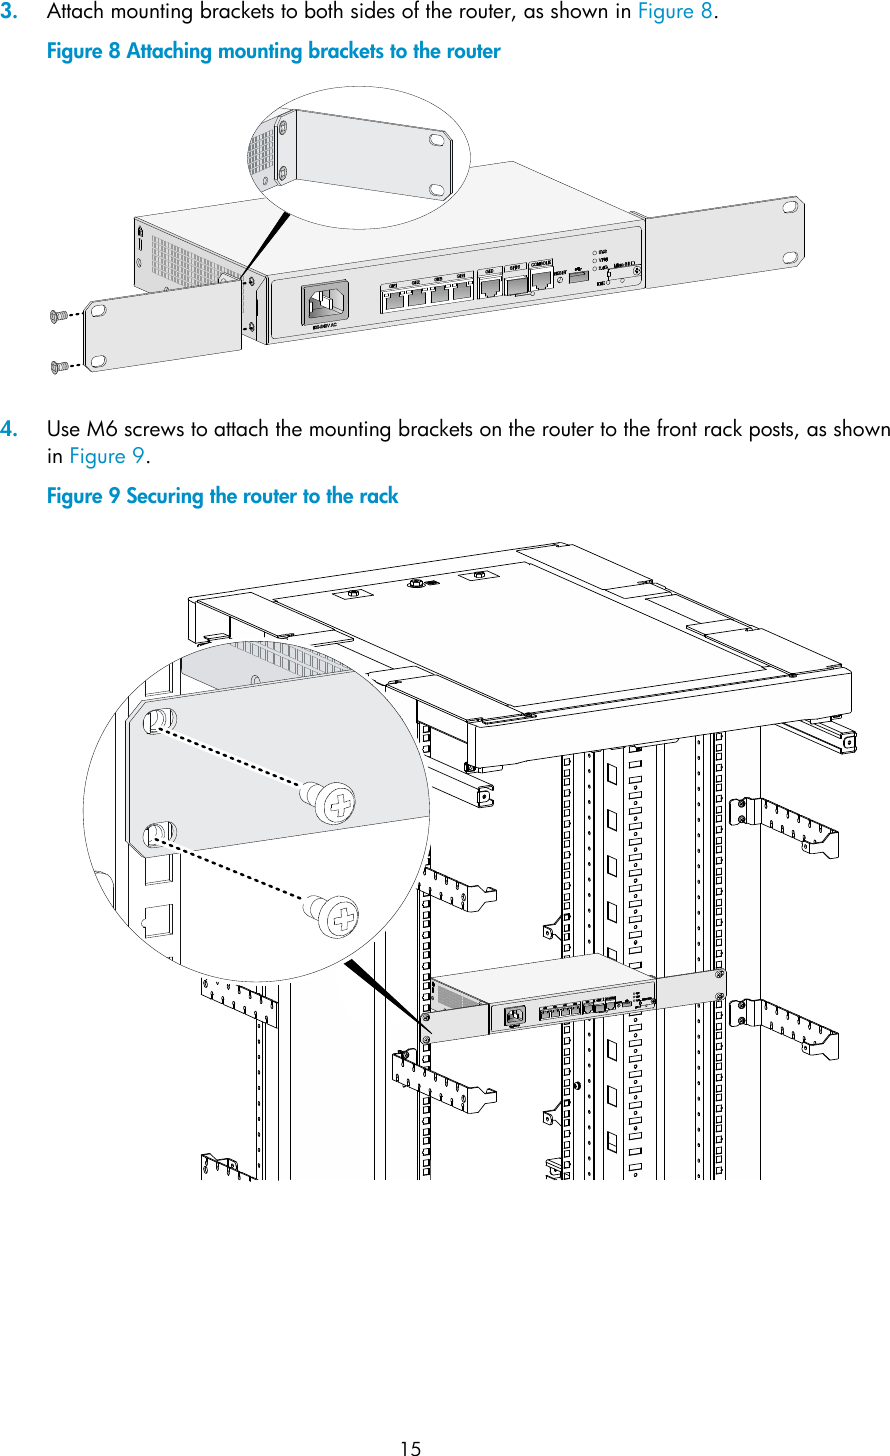  15 3. Attach mounting brackets to both sides of the router, as shown in Figure 8. Figure 8 Attaching mounting brackets to the router   4. Use M6 screws to attach the mounting brackets on the router to the front rack posts, as shown in Figure 9. Figure 9 Securing the router to the rack   